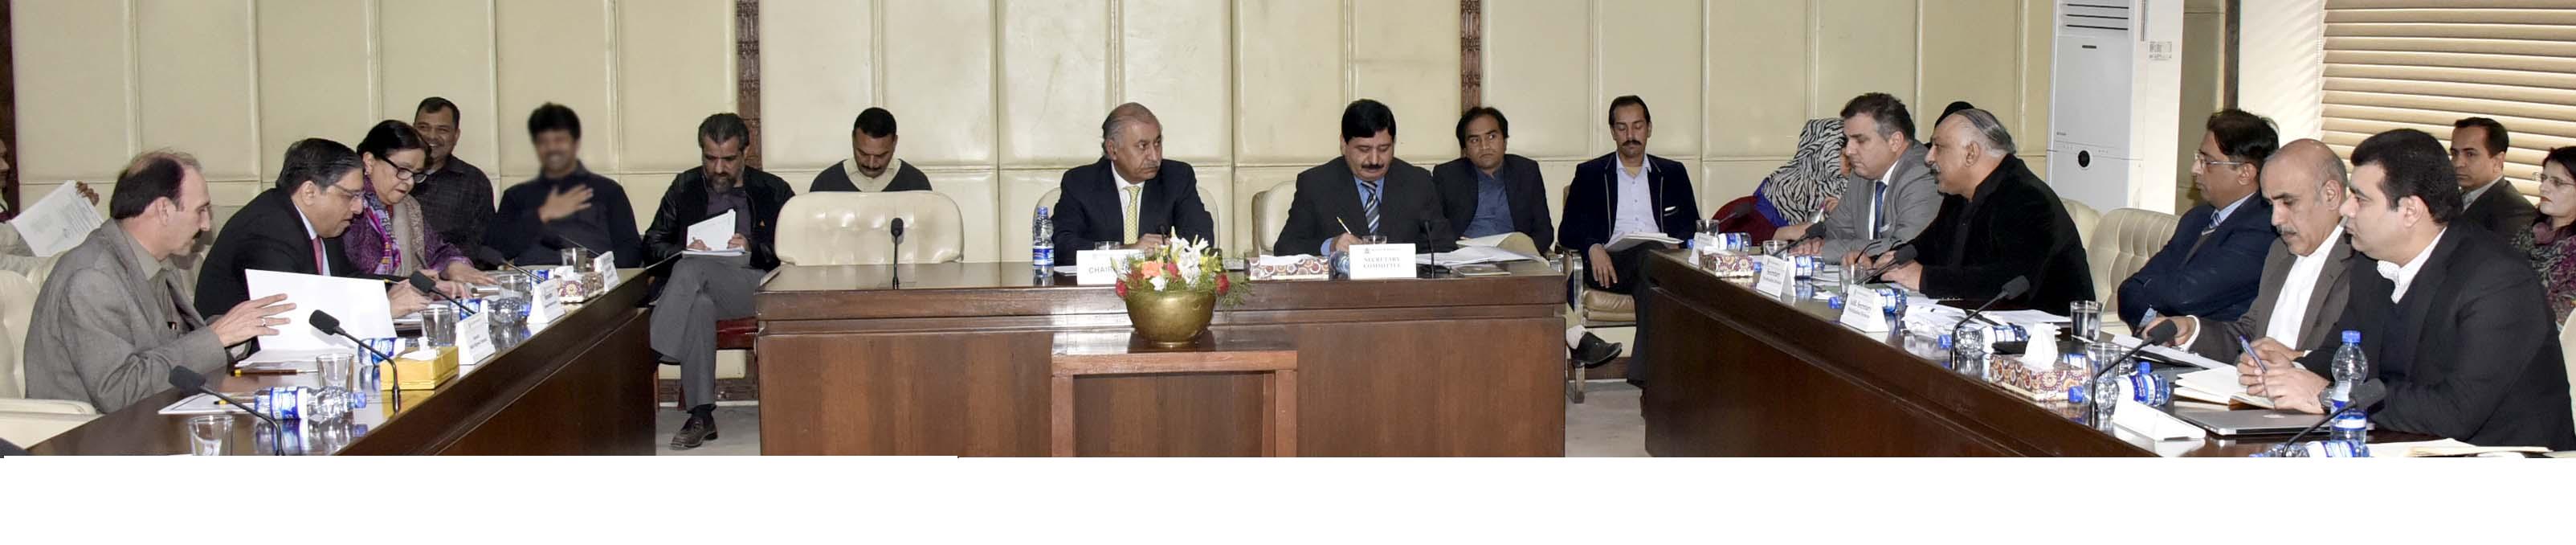 SENATOR MOHSIN AZIZ CHAIRMAN SENATE STANDING COMMITTEE ON PRIVATIZATION AND STATISTICS PRESIDING OVER A MEETING OF THE COMMITTEE, AT PARLIAMENT HOUSE ISLAMABAD ON JANUARY 30, 2018.